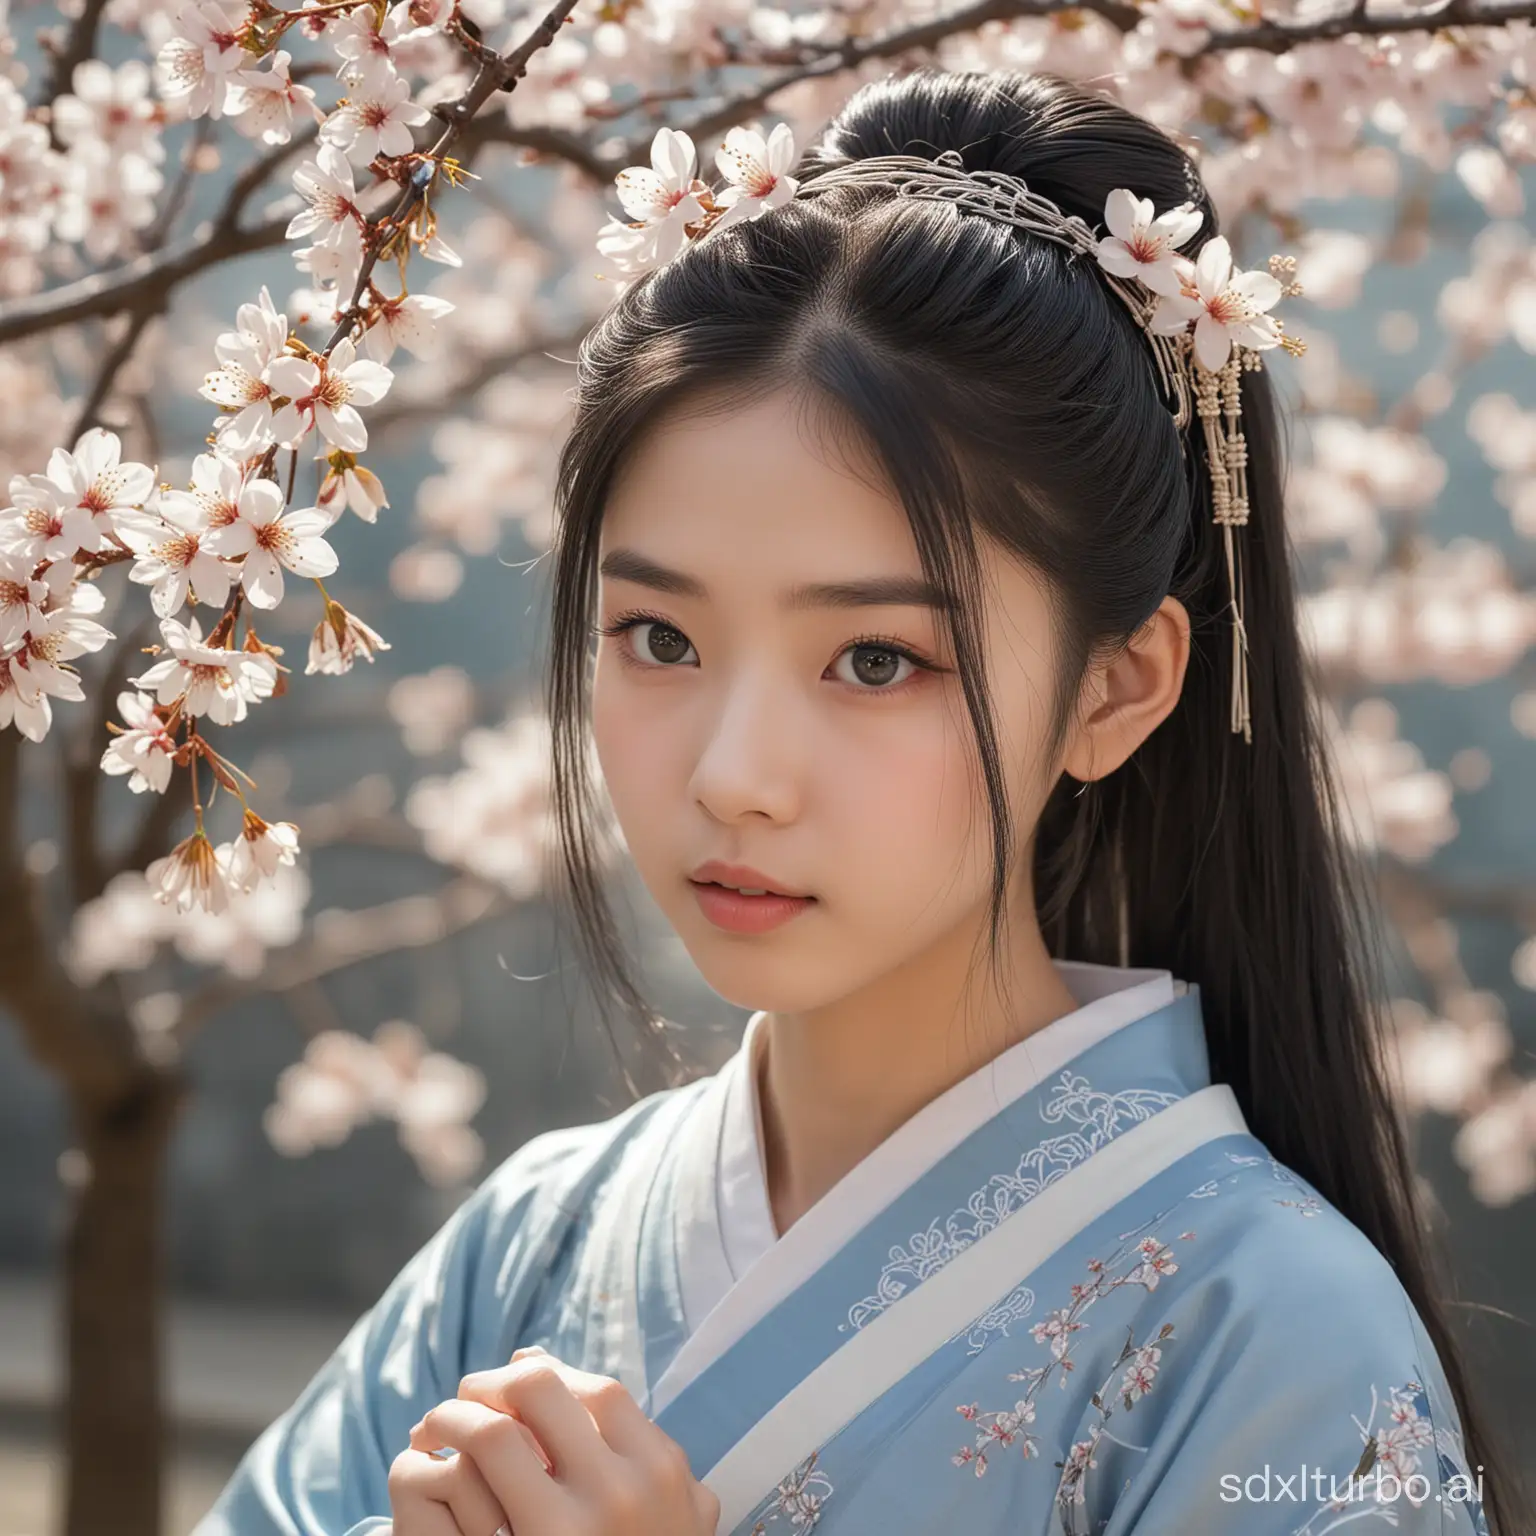 A young girl, with very fair complexion, has a pointed face, slender, sideways watching flowers, with long and black hair half tied up, adorned with a hairpin, faint and long eyebrows. The gray-blue pupils are deep and intricate, with a high and deep nose bridge, wearing a semi-transparent white Hanfu, with slender fingers adorned with a ring, on a sunny day, watching flowers under a cherry blossom tree.